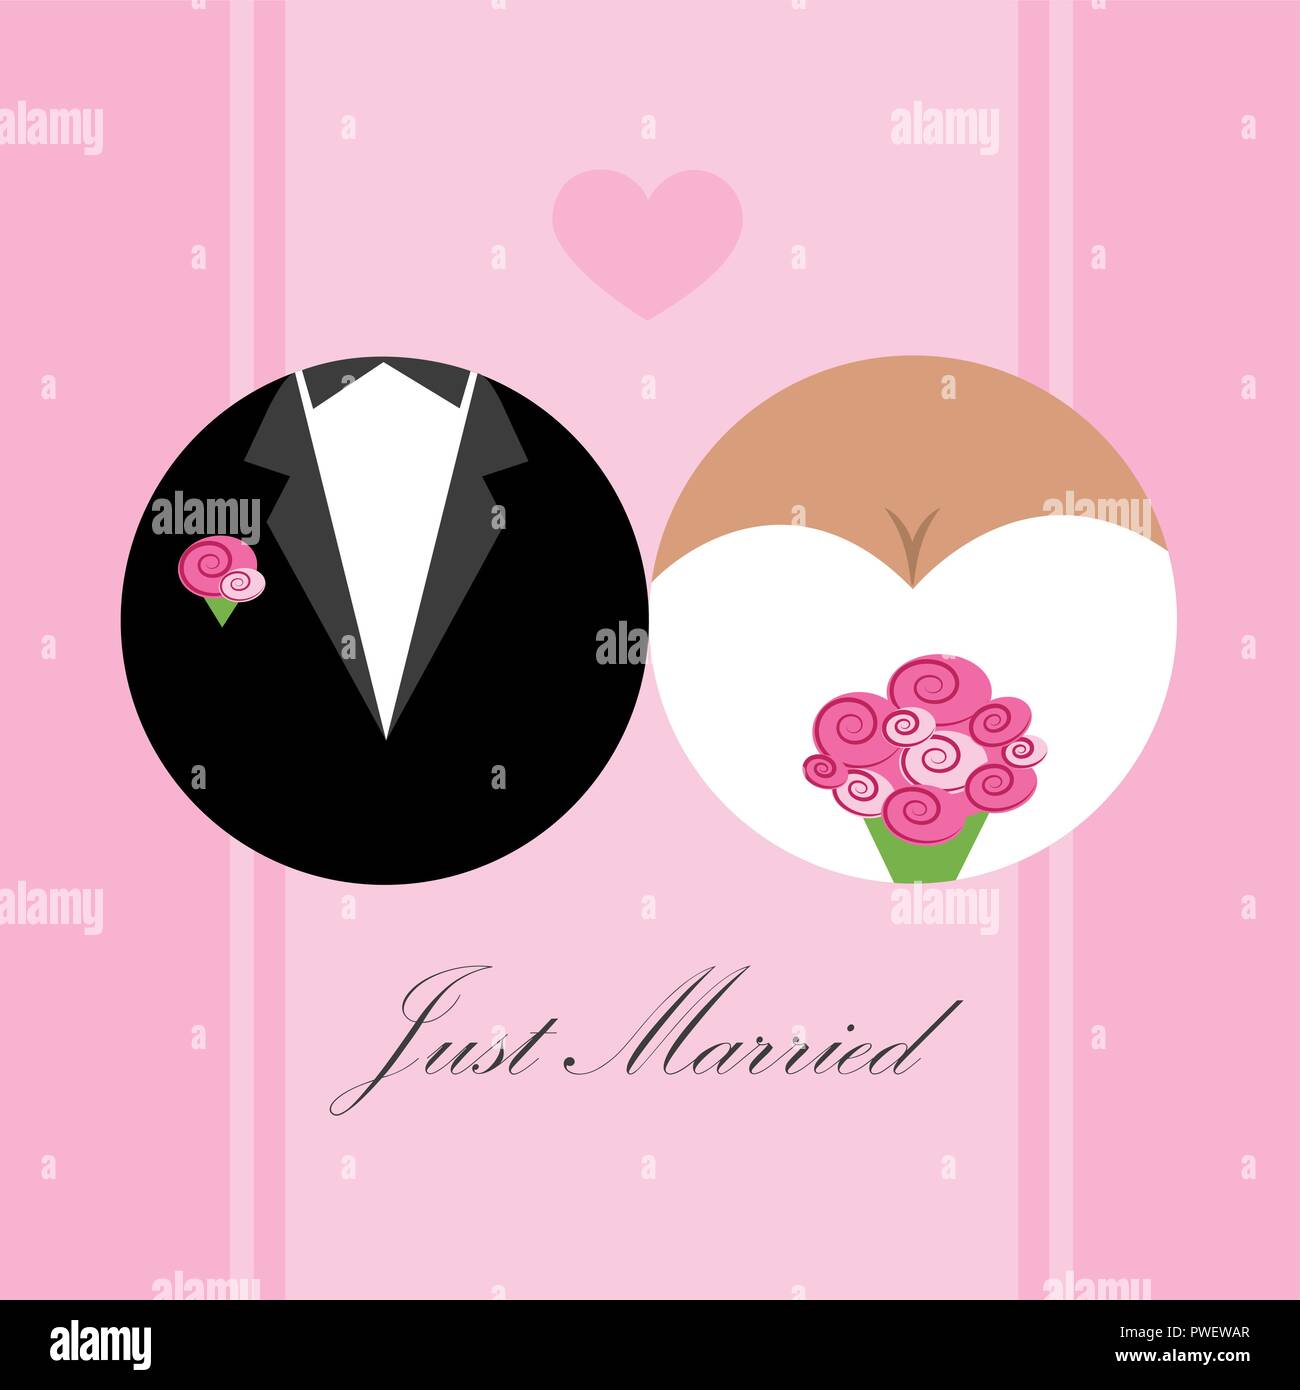 just married inviting card for wedding vector illustration EPS10 Stock Vector